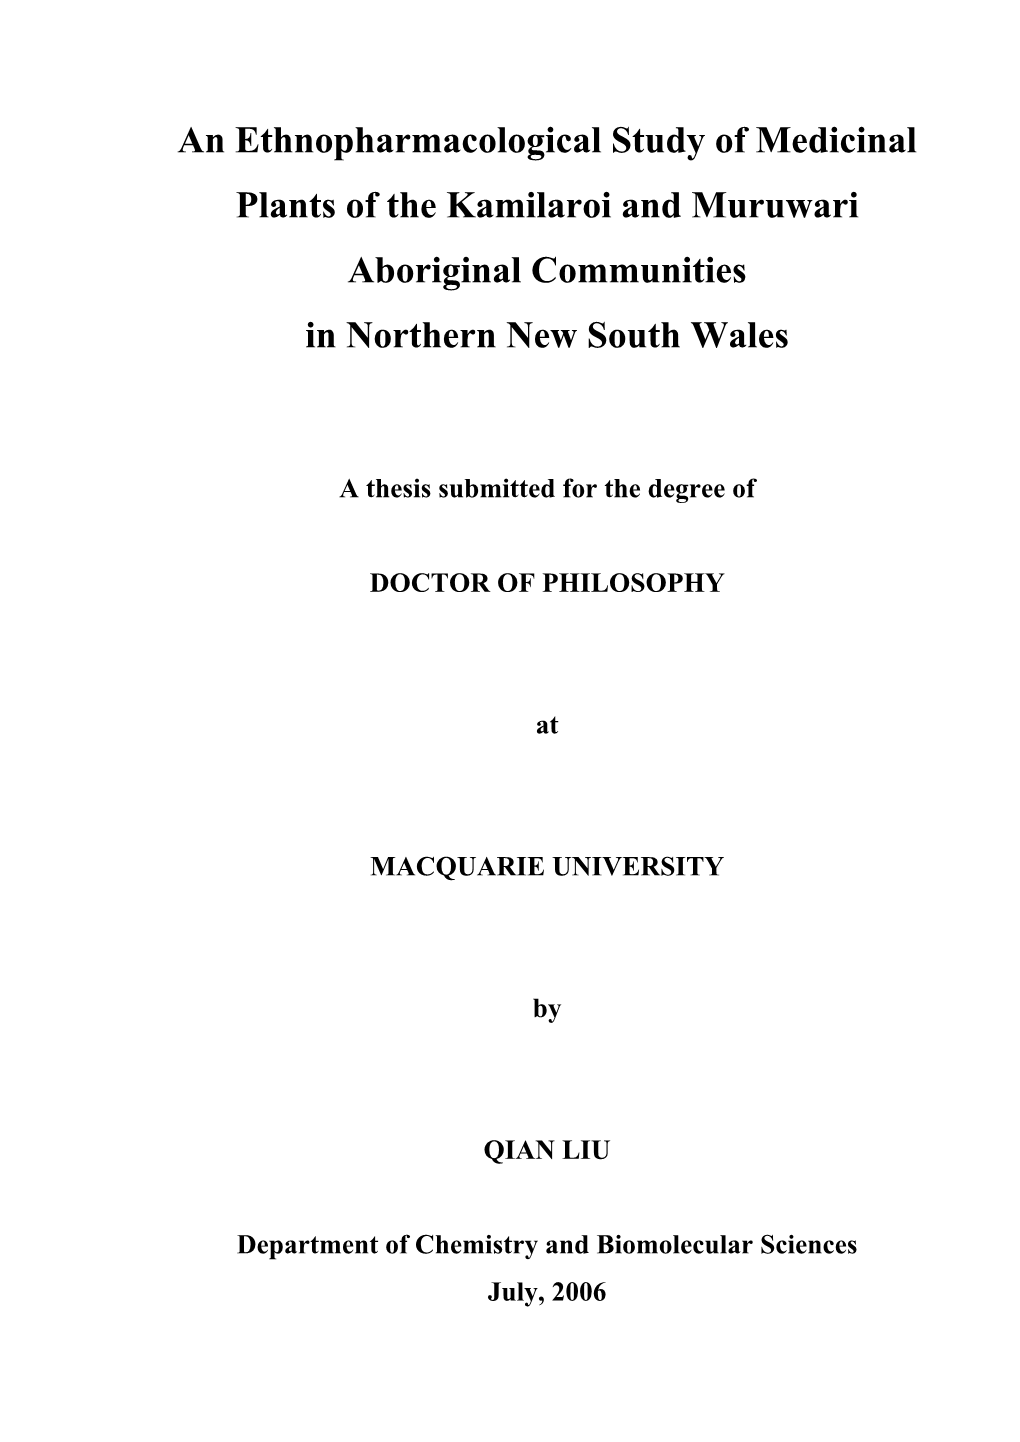 An Ethnopharmacological Study of Medicinal Plants of the Kamilaroi and Muruwari Aboriginal Communities in Northern New South Wales